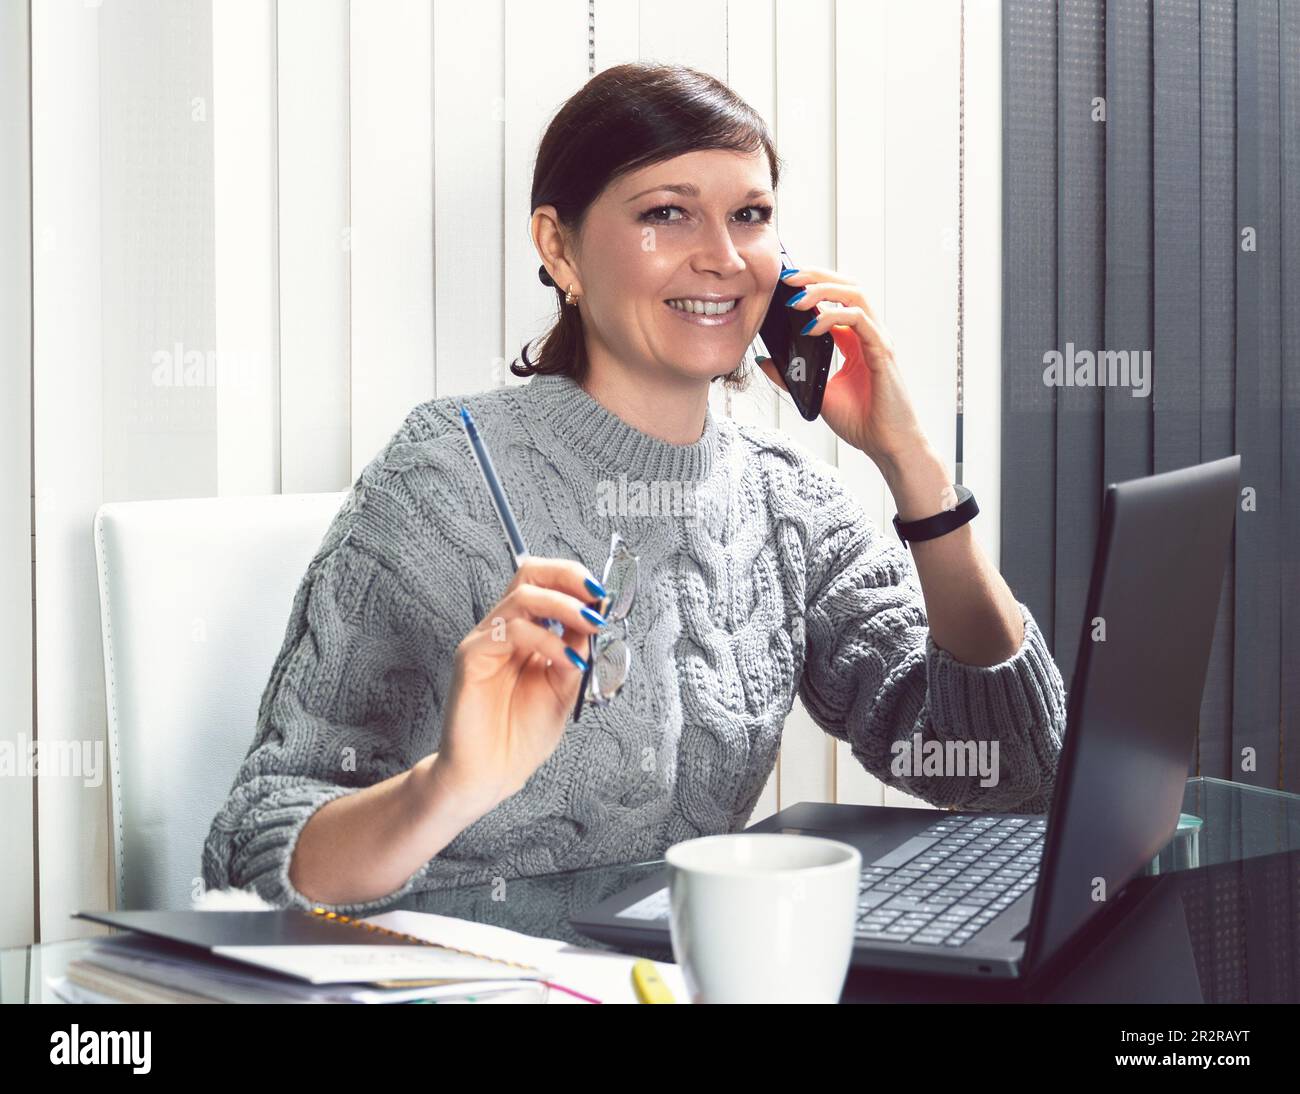 Beautiful young woman with beaming smile, talking on the phone looking at the camera, in front of the laptop, in the modern home office doing business Stock Photo